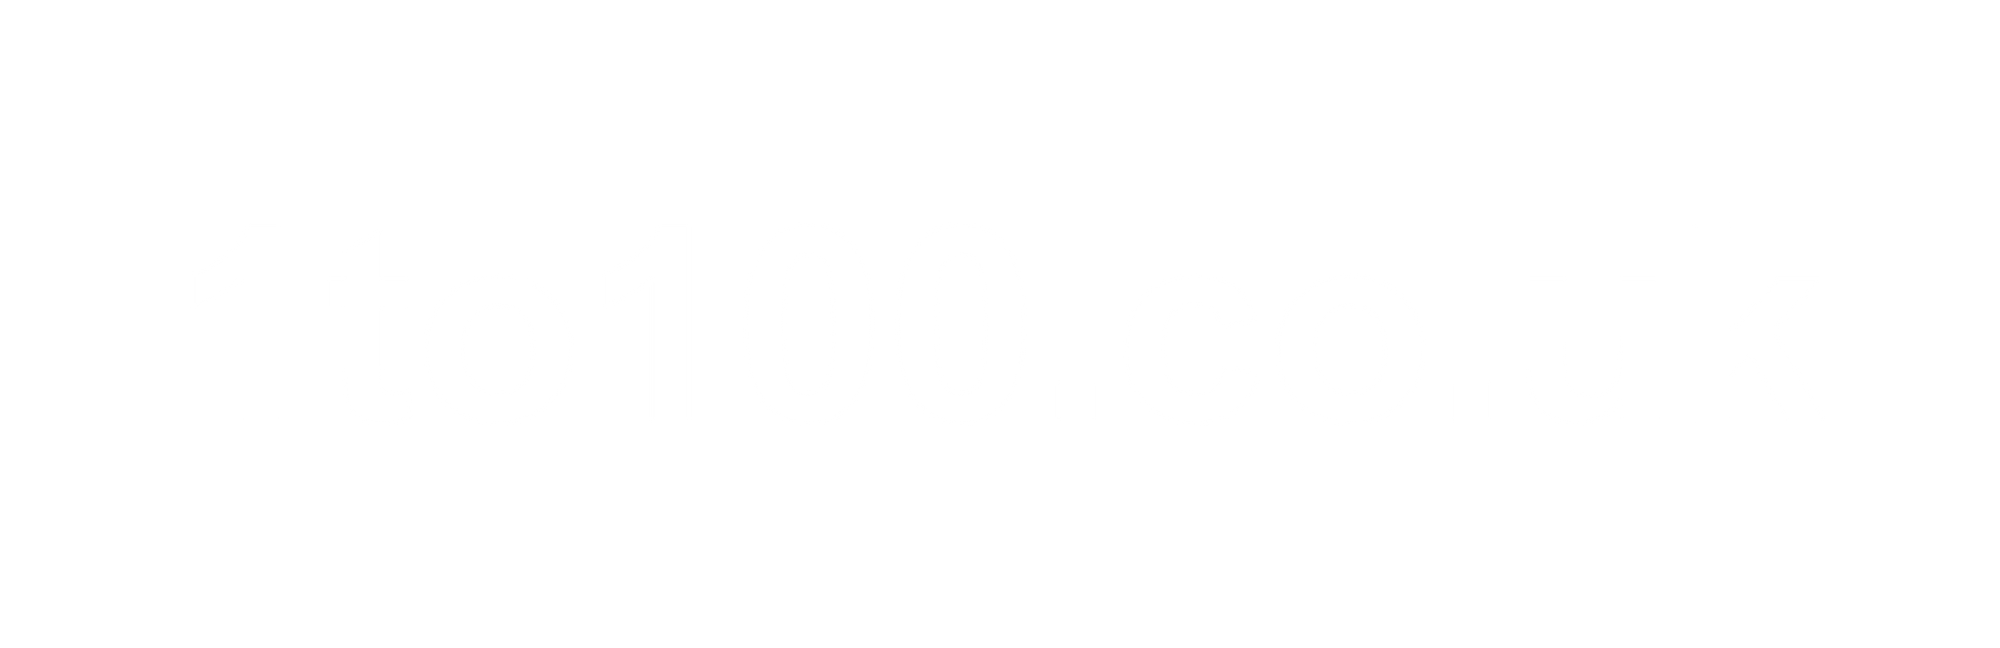 1to100.co.uk